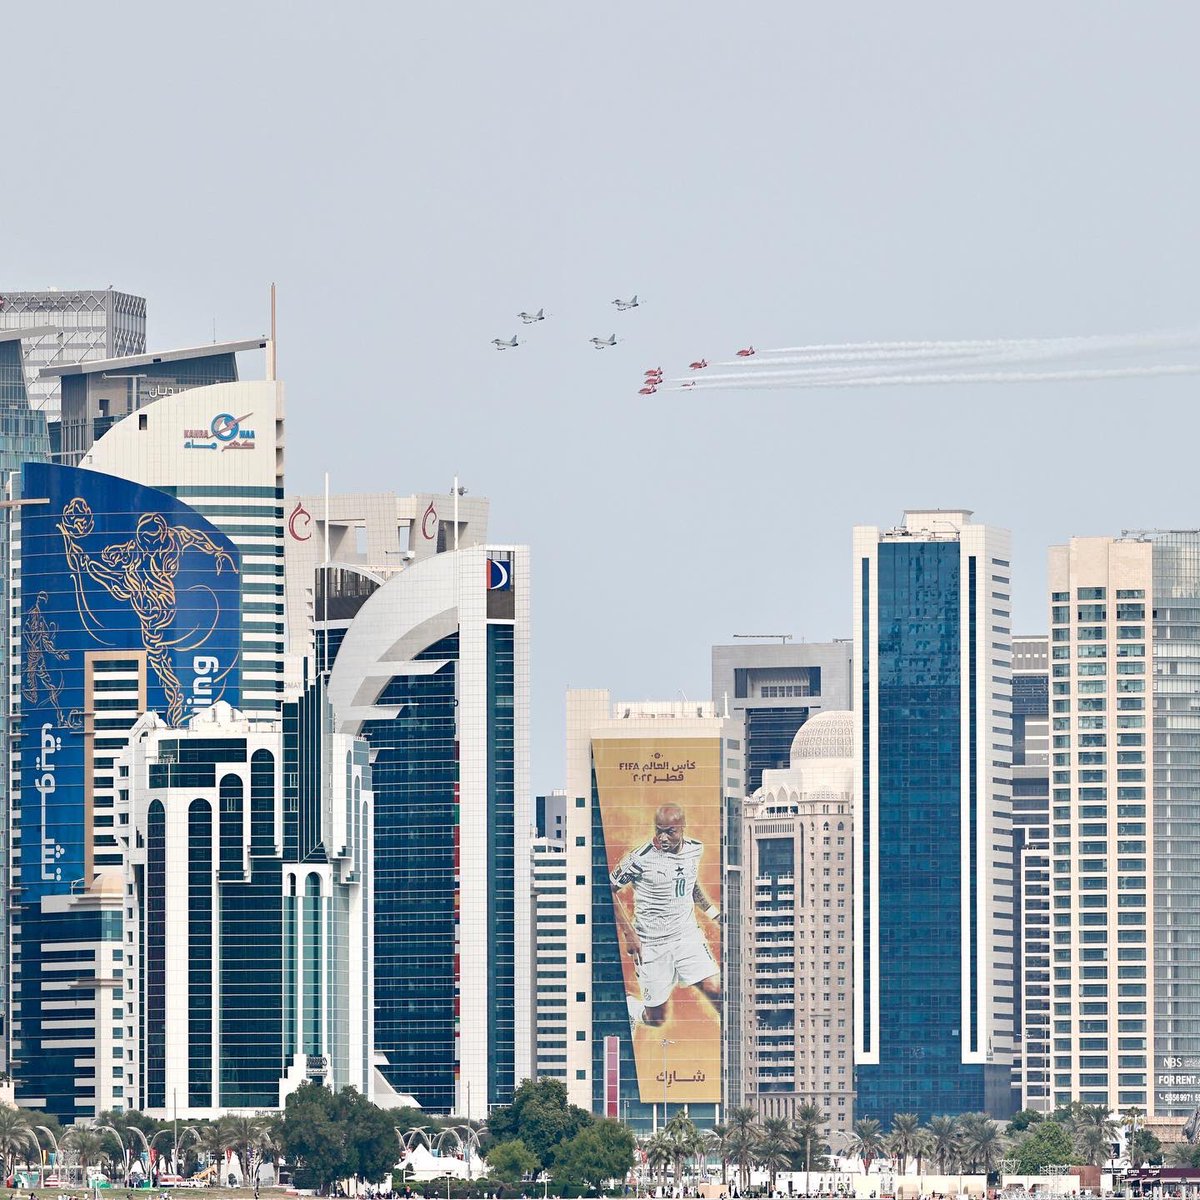 The Red Arrows put on a show and decorated the Doha Corniche and West Bay skies ✈️ #Qatar2022